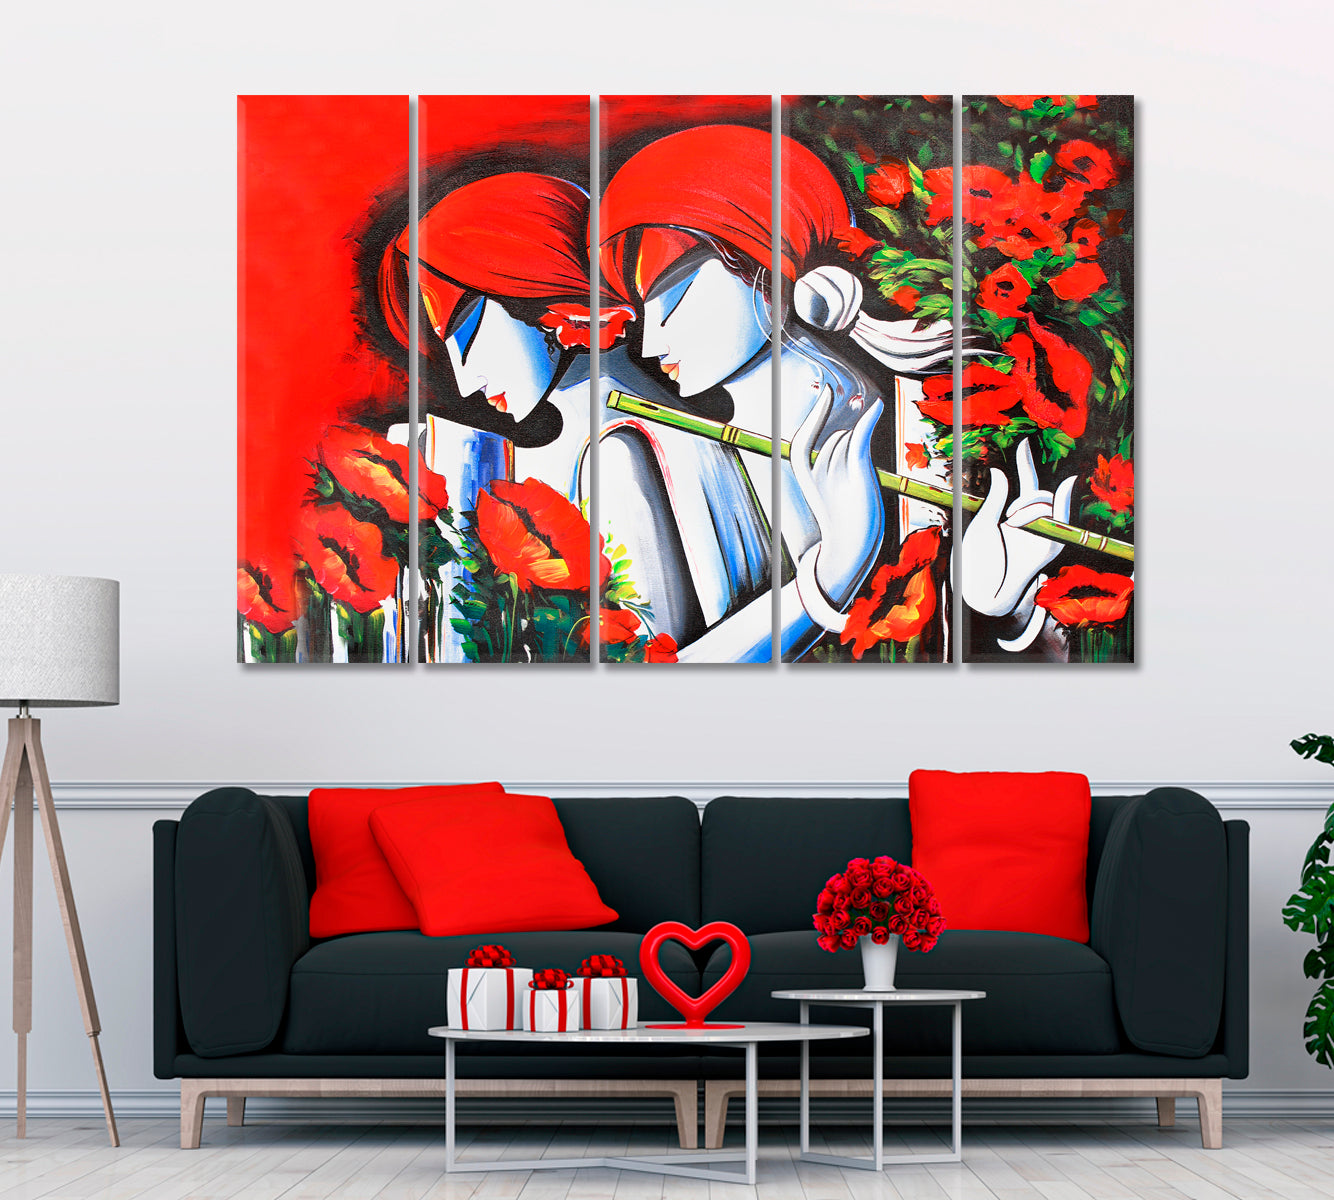 Abstract Vivid Lord Radha Krishna with Flute Religious Modern Art Artesty 5 panels 36" x 24" 